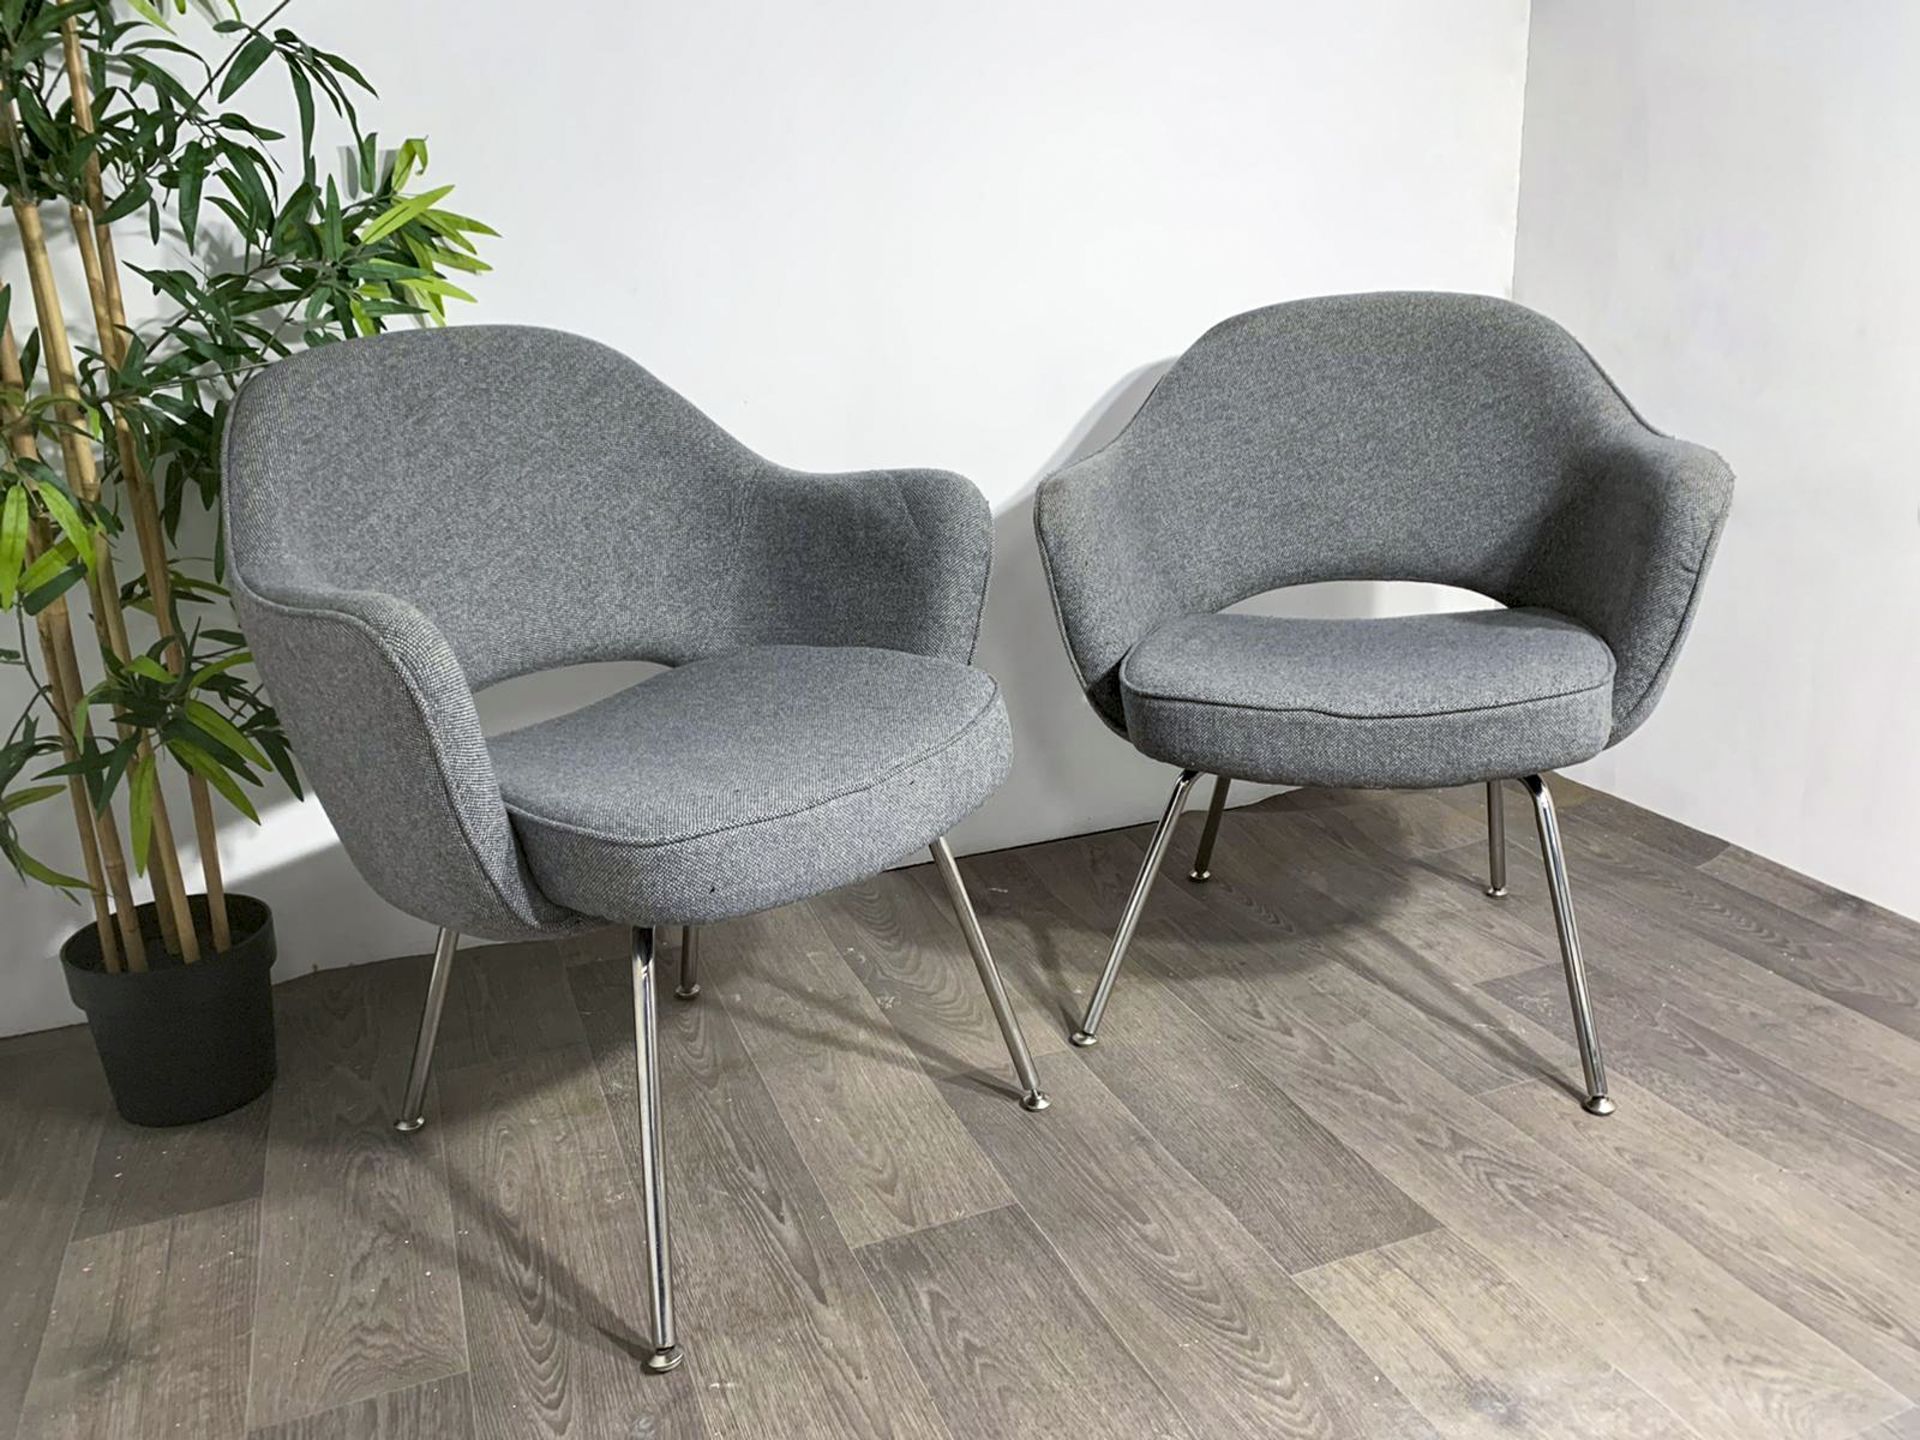 Grey Fabric Commercial Grade Chair with Chrome Legs x2 - Image 7 of 8